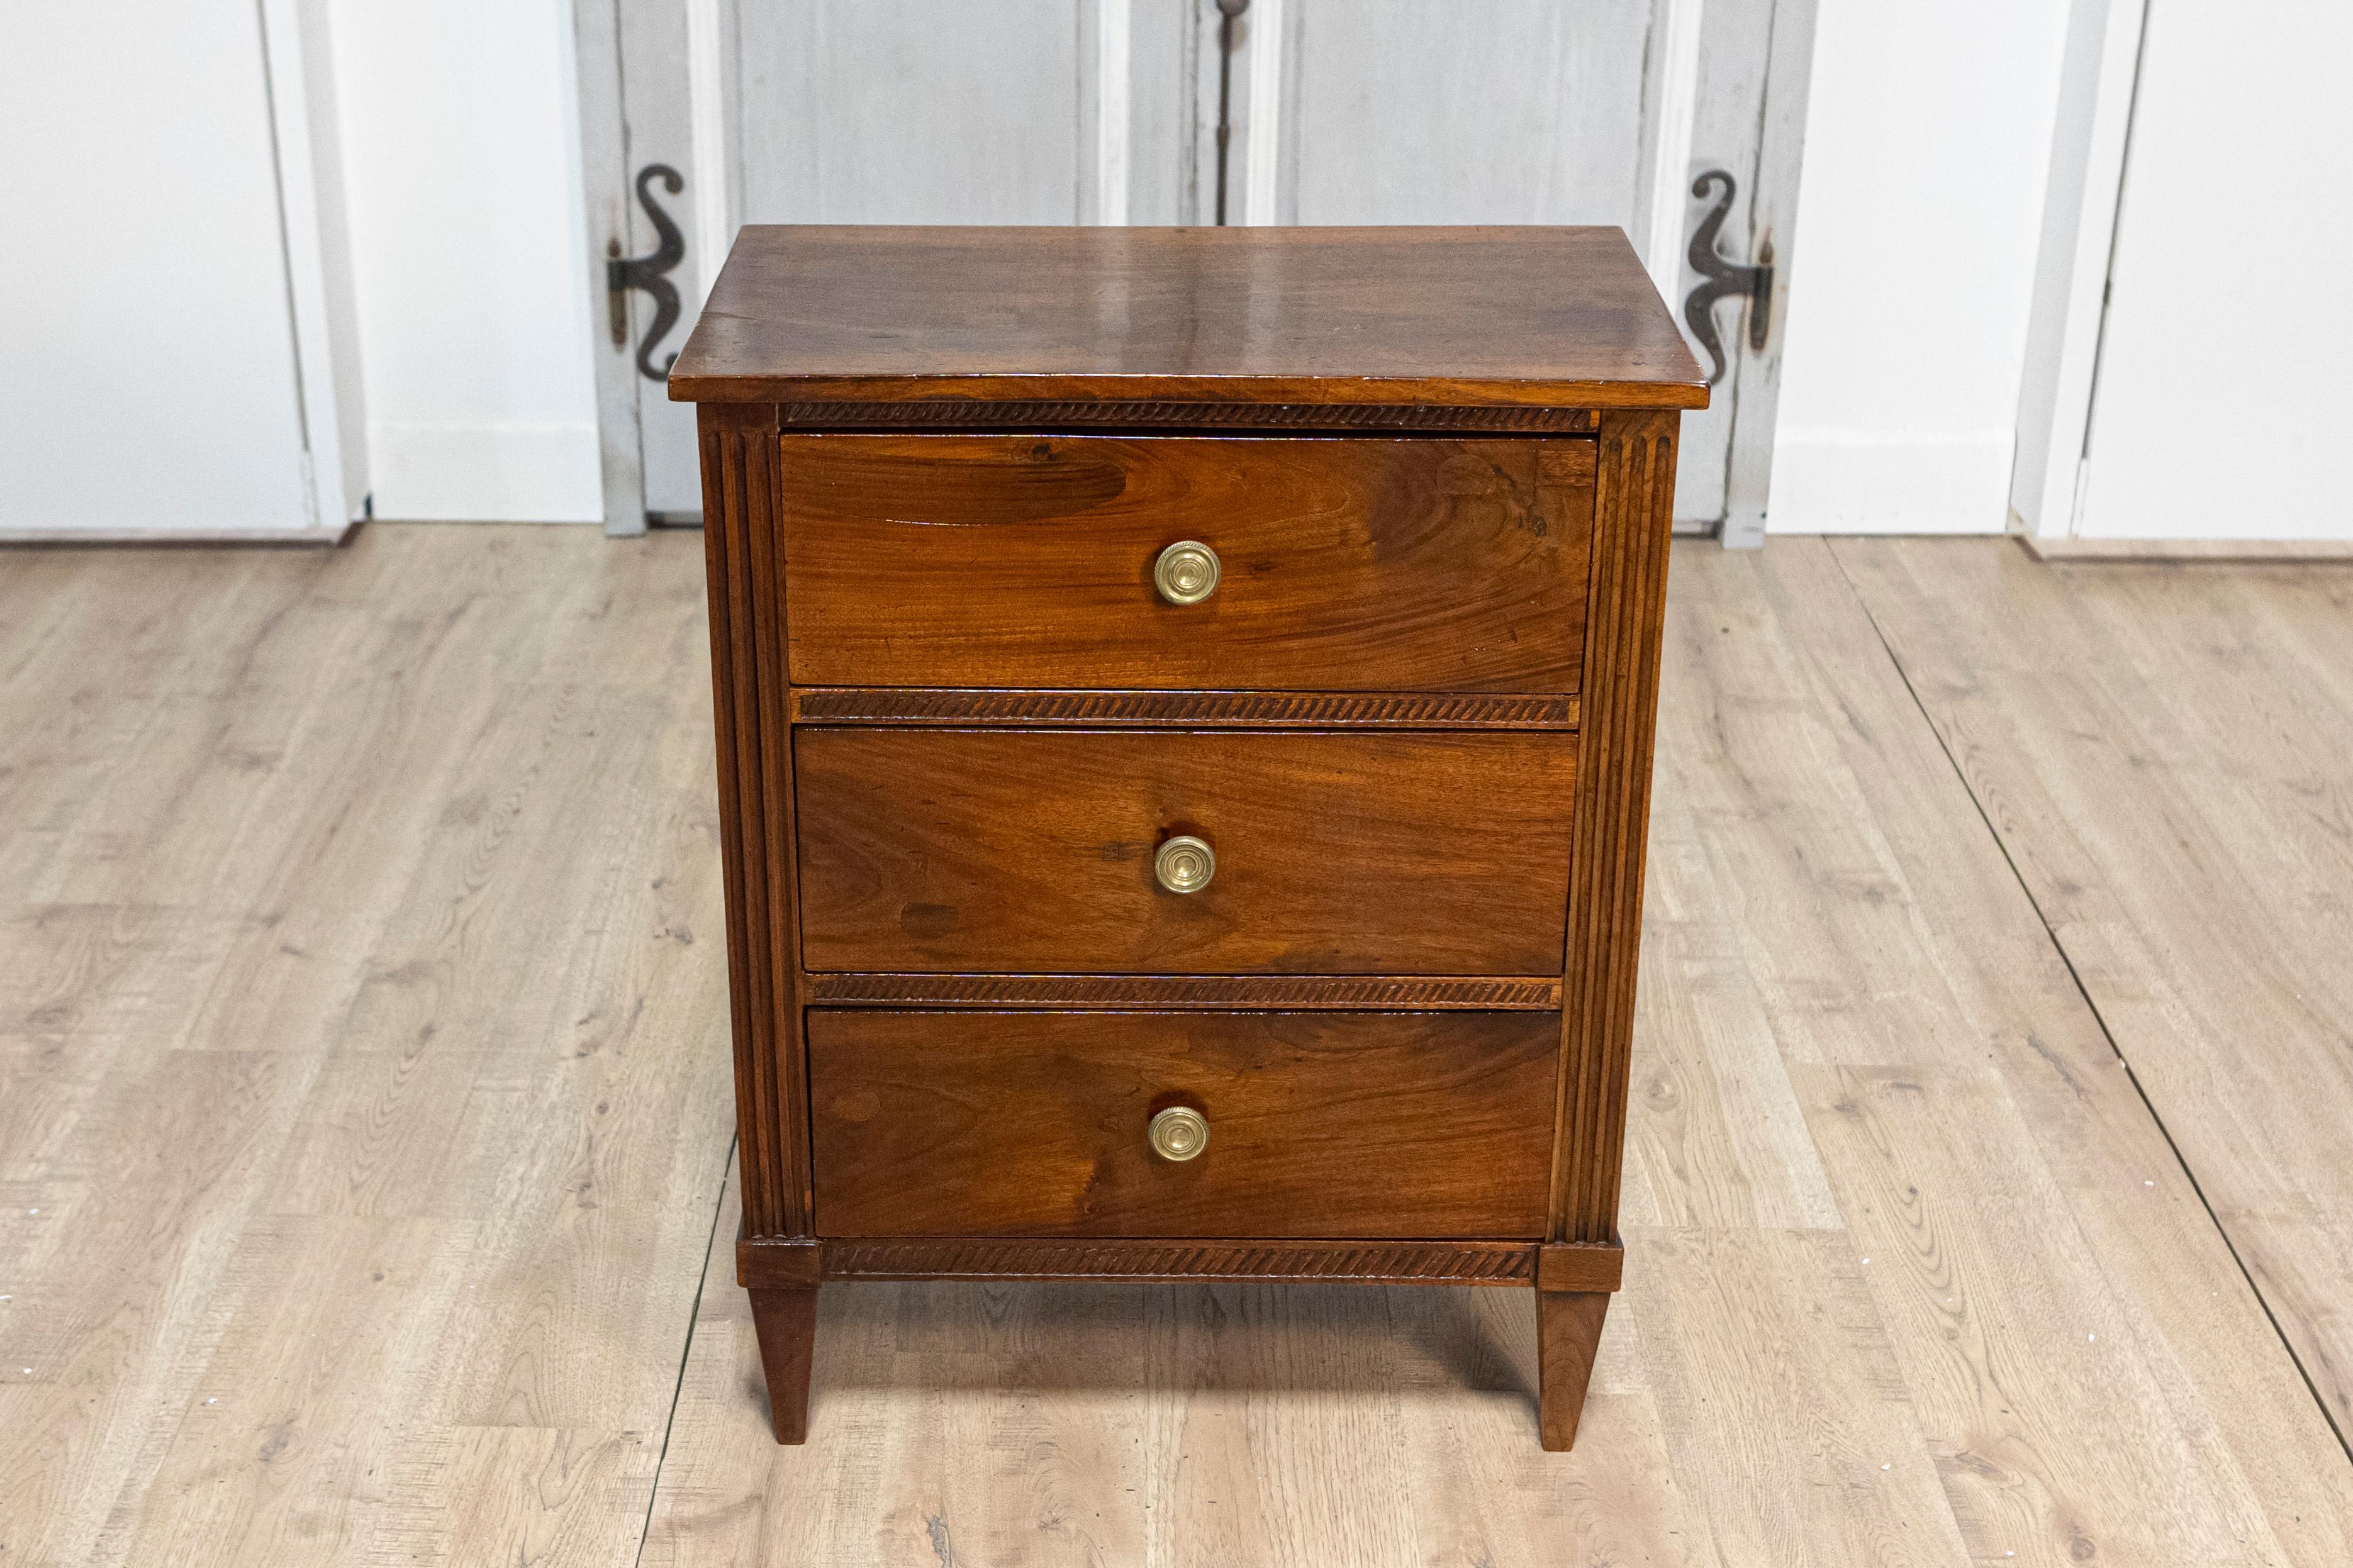 An Italian Directoire period bedside chest from the 18th century, in solid walnut, with three drawers, carved accents and fluted side posts. This exquisite Italian Directoire period bedside chest from the 18th century showcases the elegance and